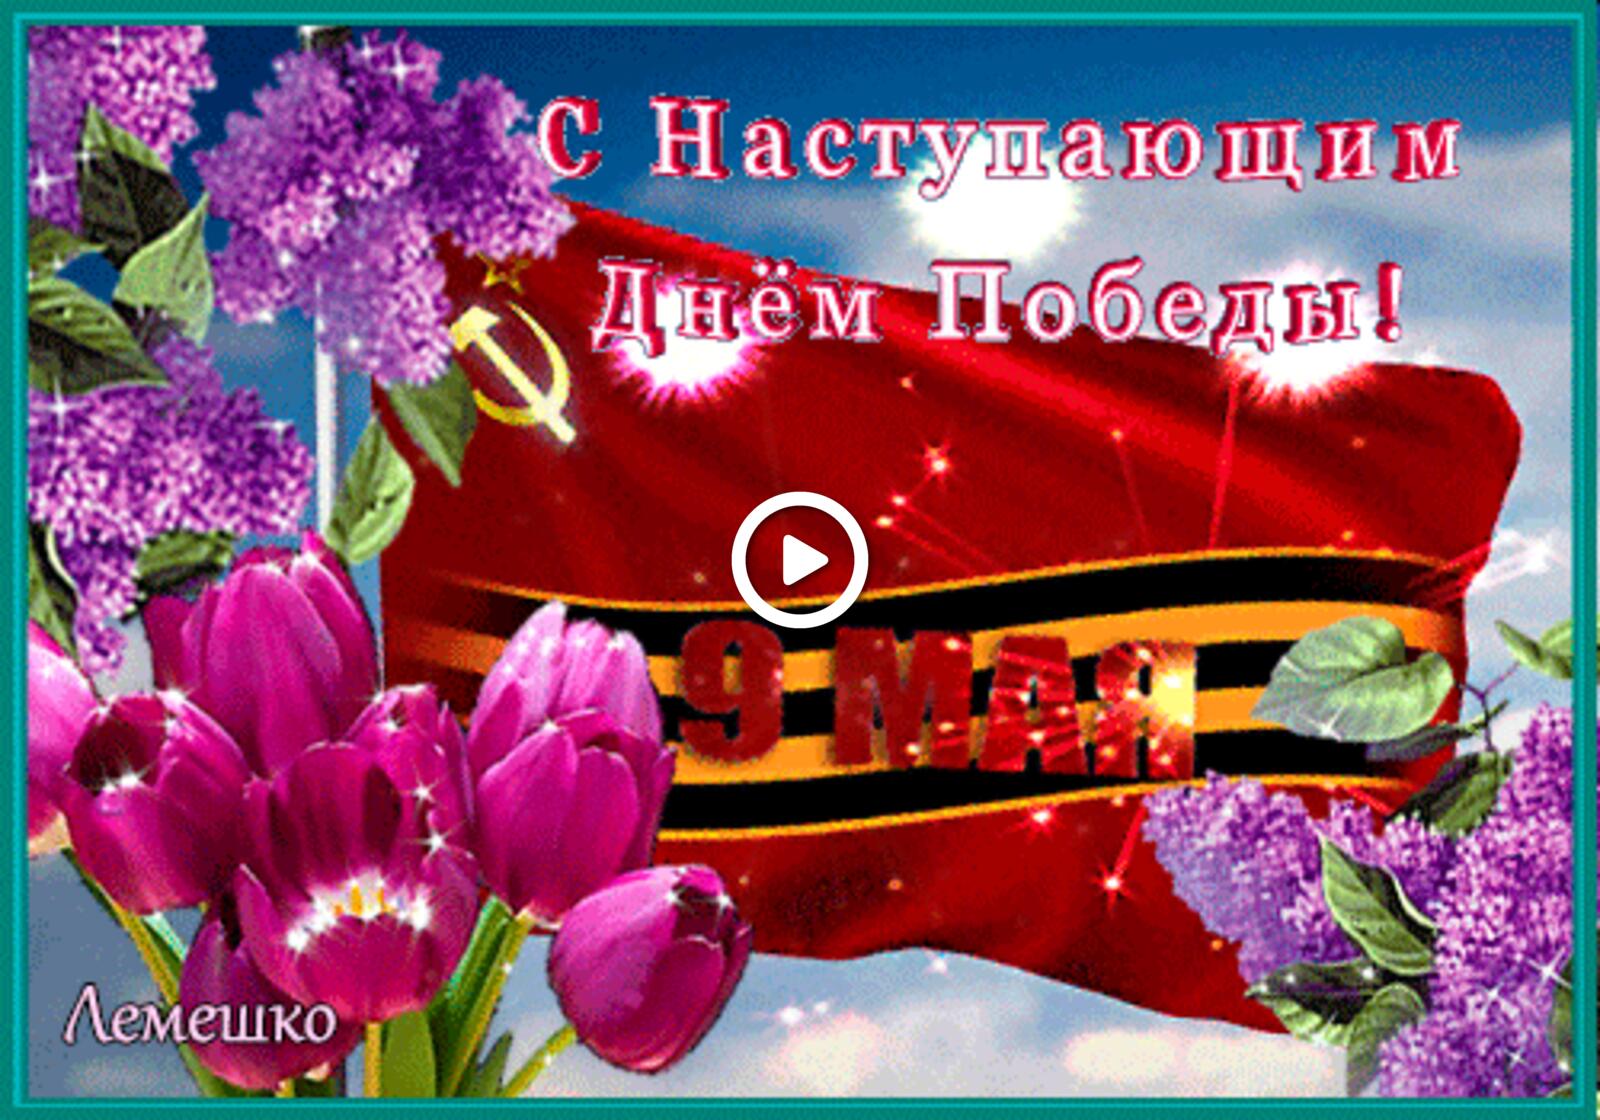 A postcard on the subject of happy victory day happy may 9 postcards holidays for free